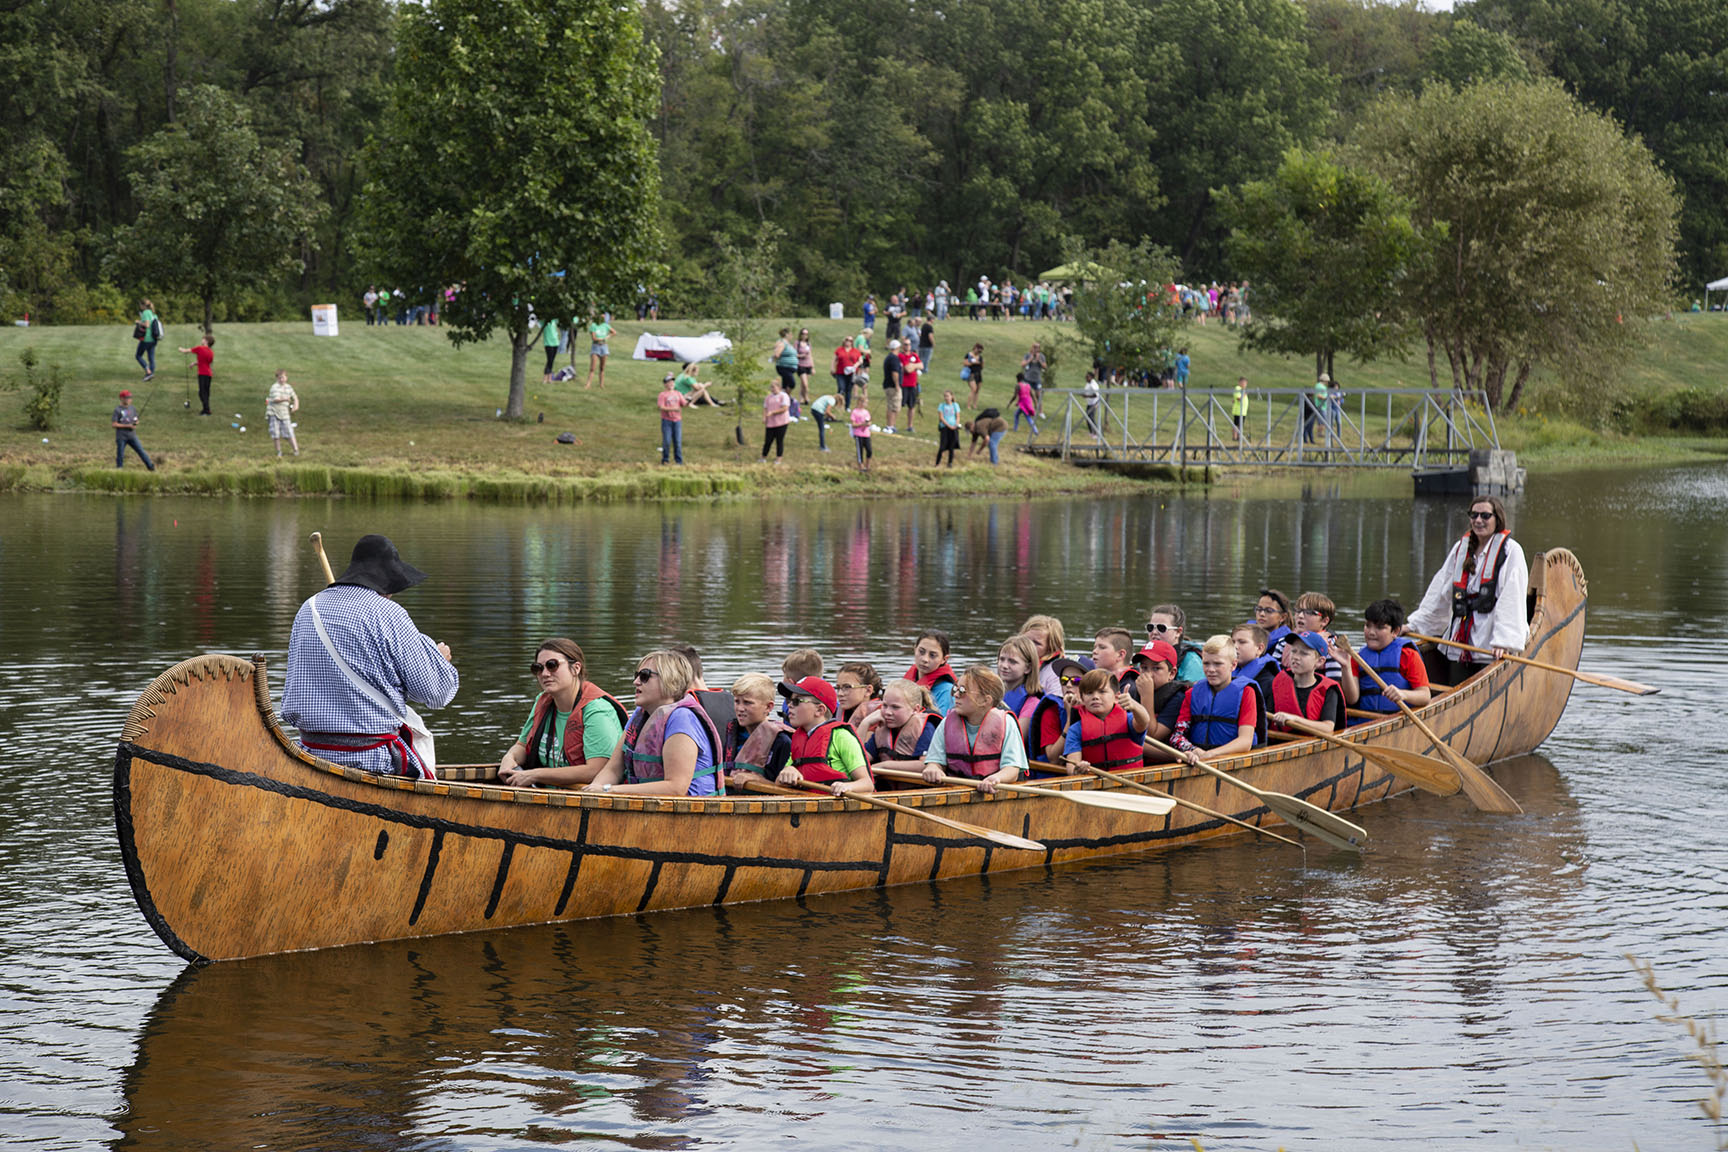 Students learn about canoeing and boat safety at the National Great Rivers Research and Education Center’s Water Festival. NGRREC file photo.